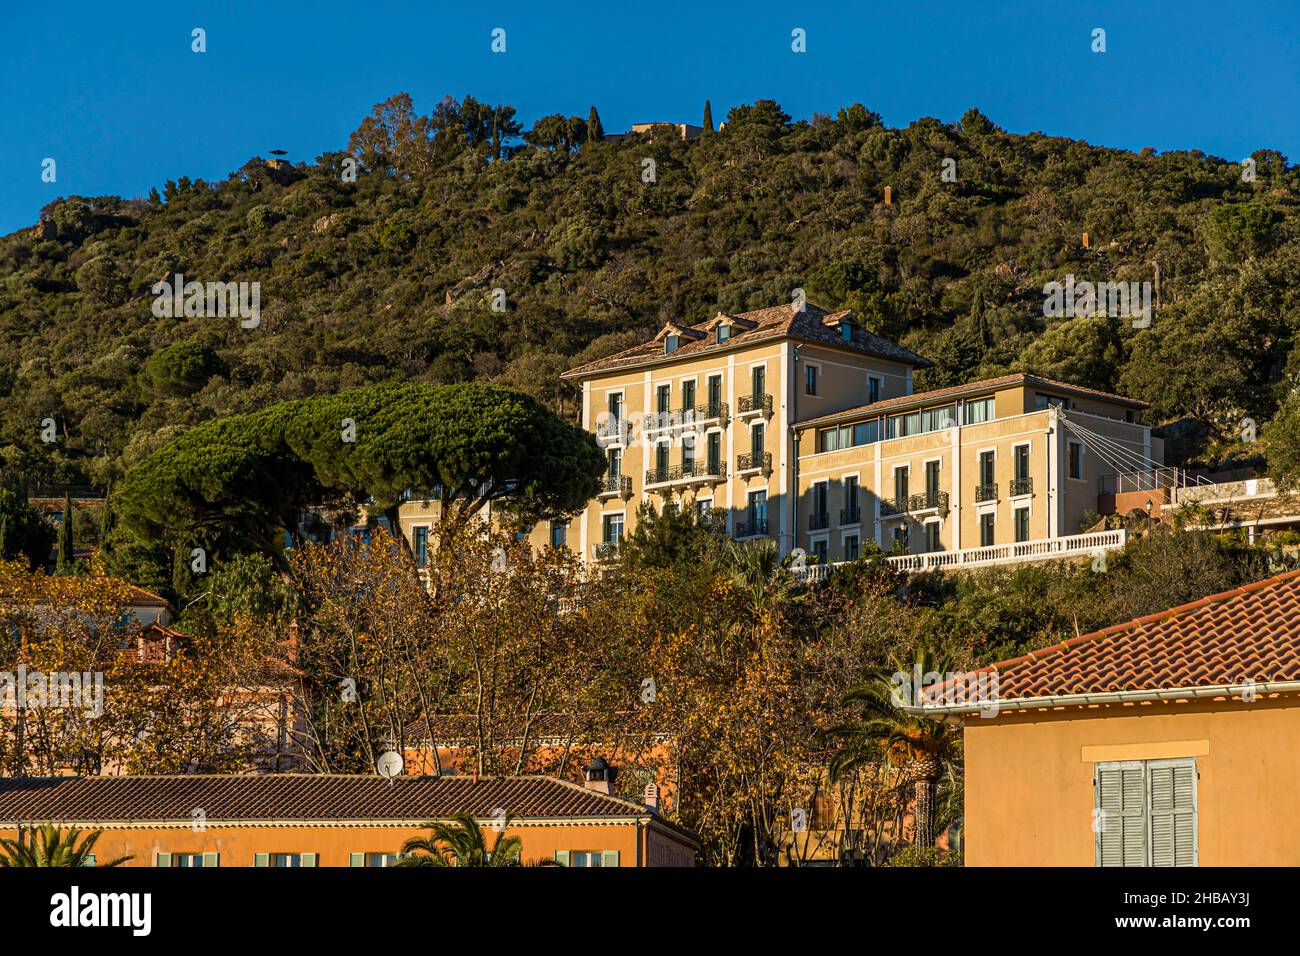 City view of Bormes-les-Mimosas (France) bathed in Mediterranean evening light Stock Photo